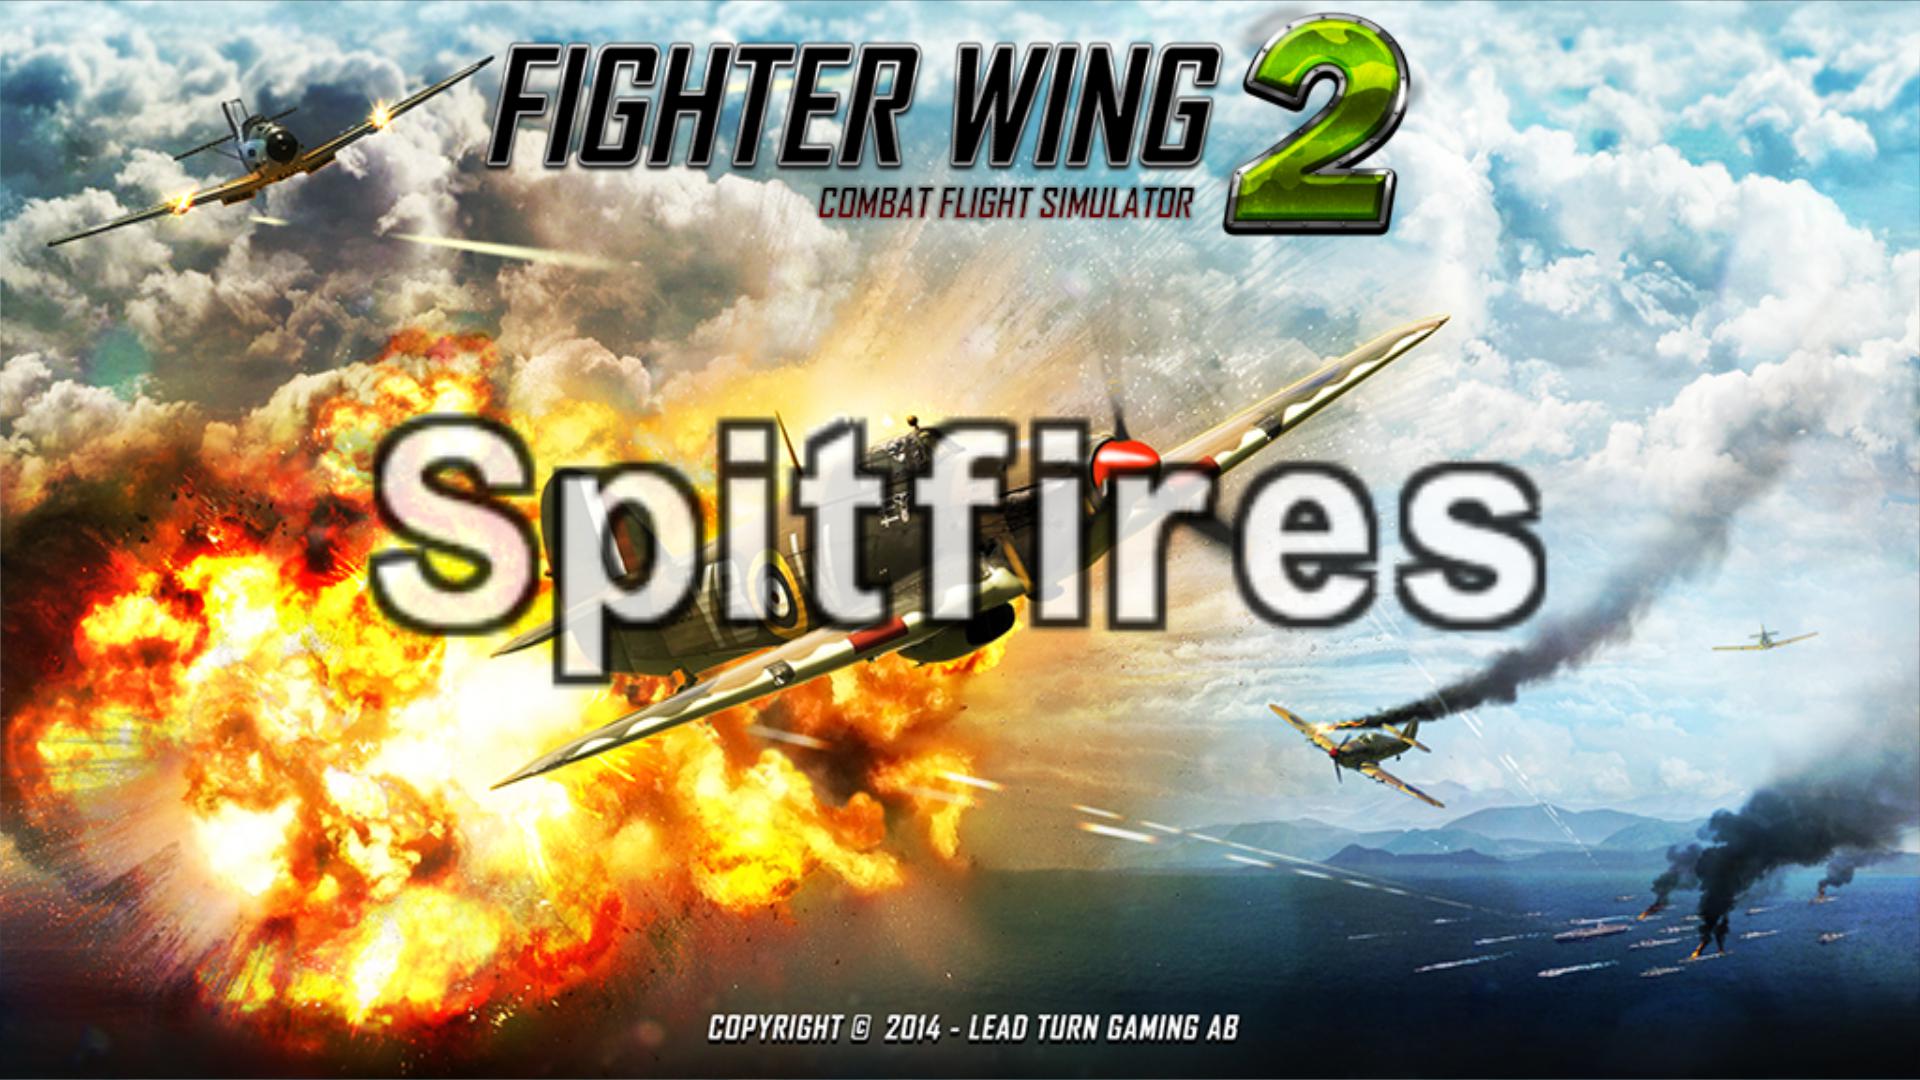 FighterWing 2 Spitfire